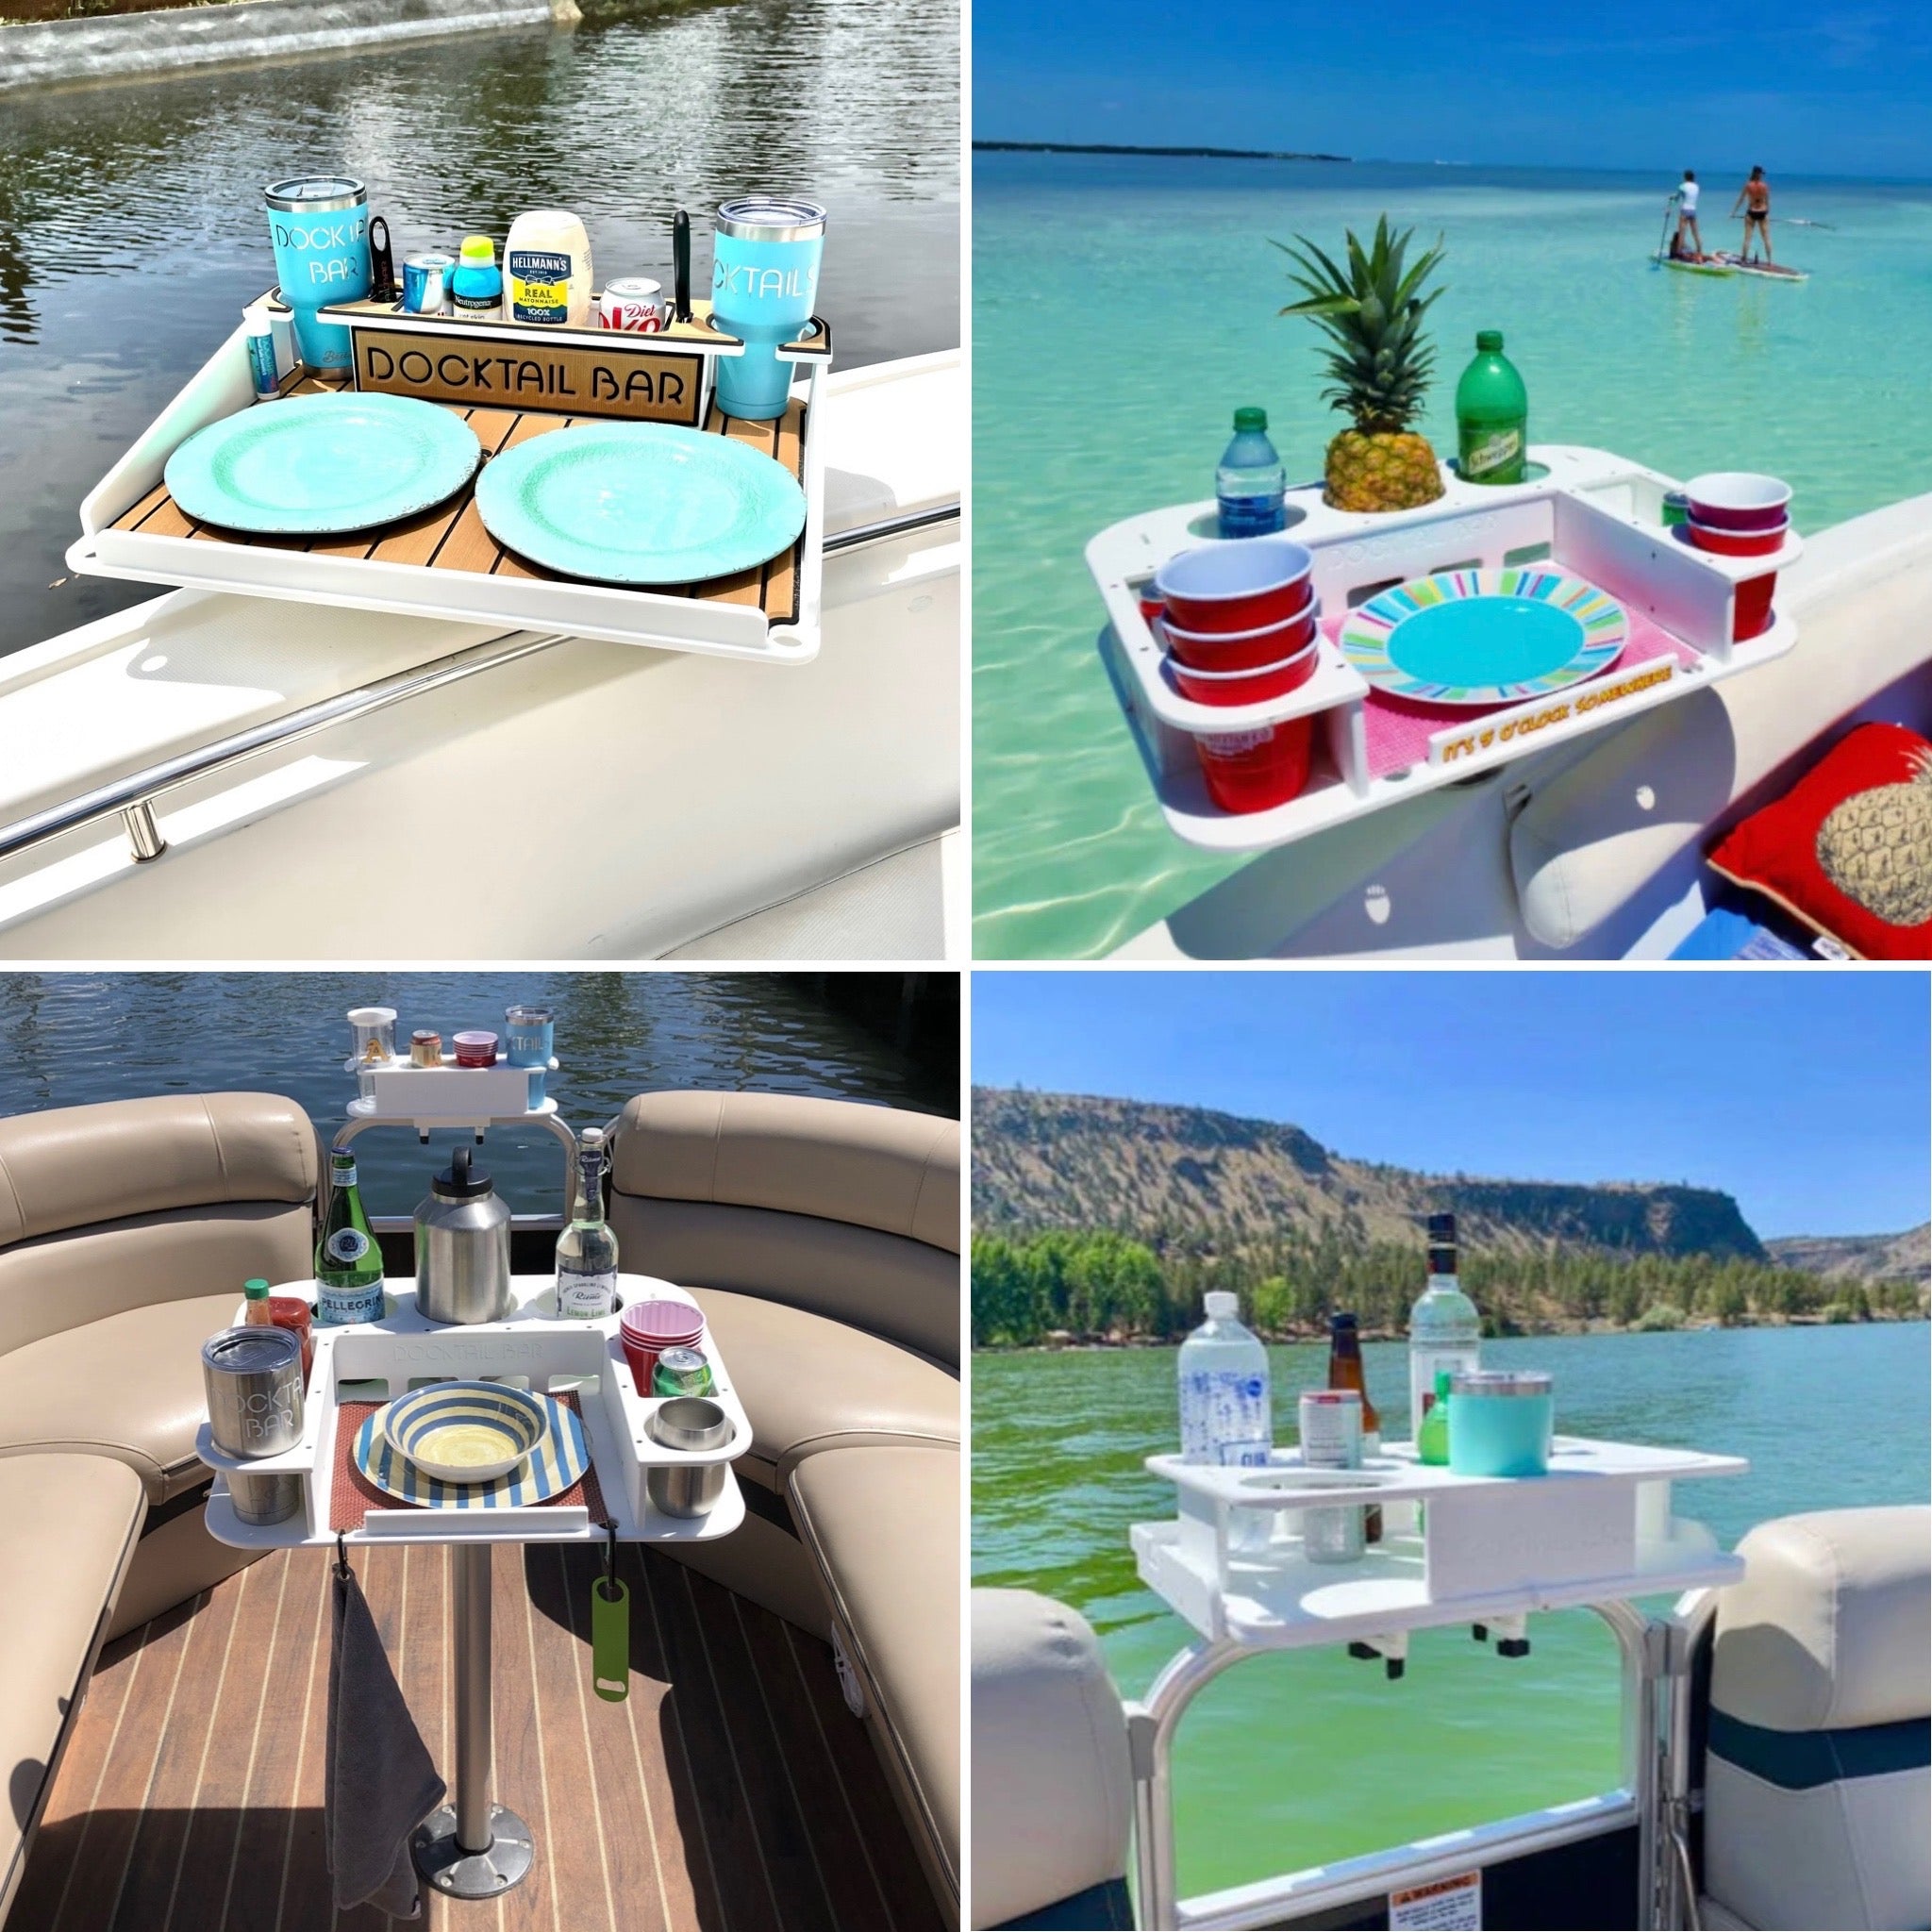 Docktail Bar's Best Selling Boat Tables and Accessories